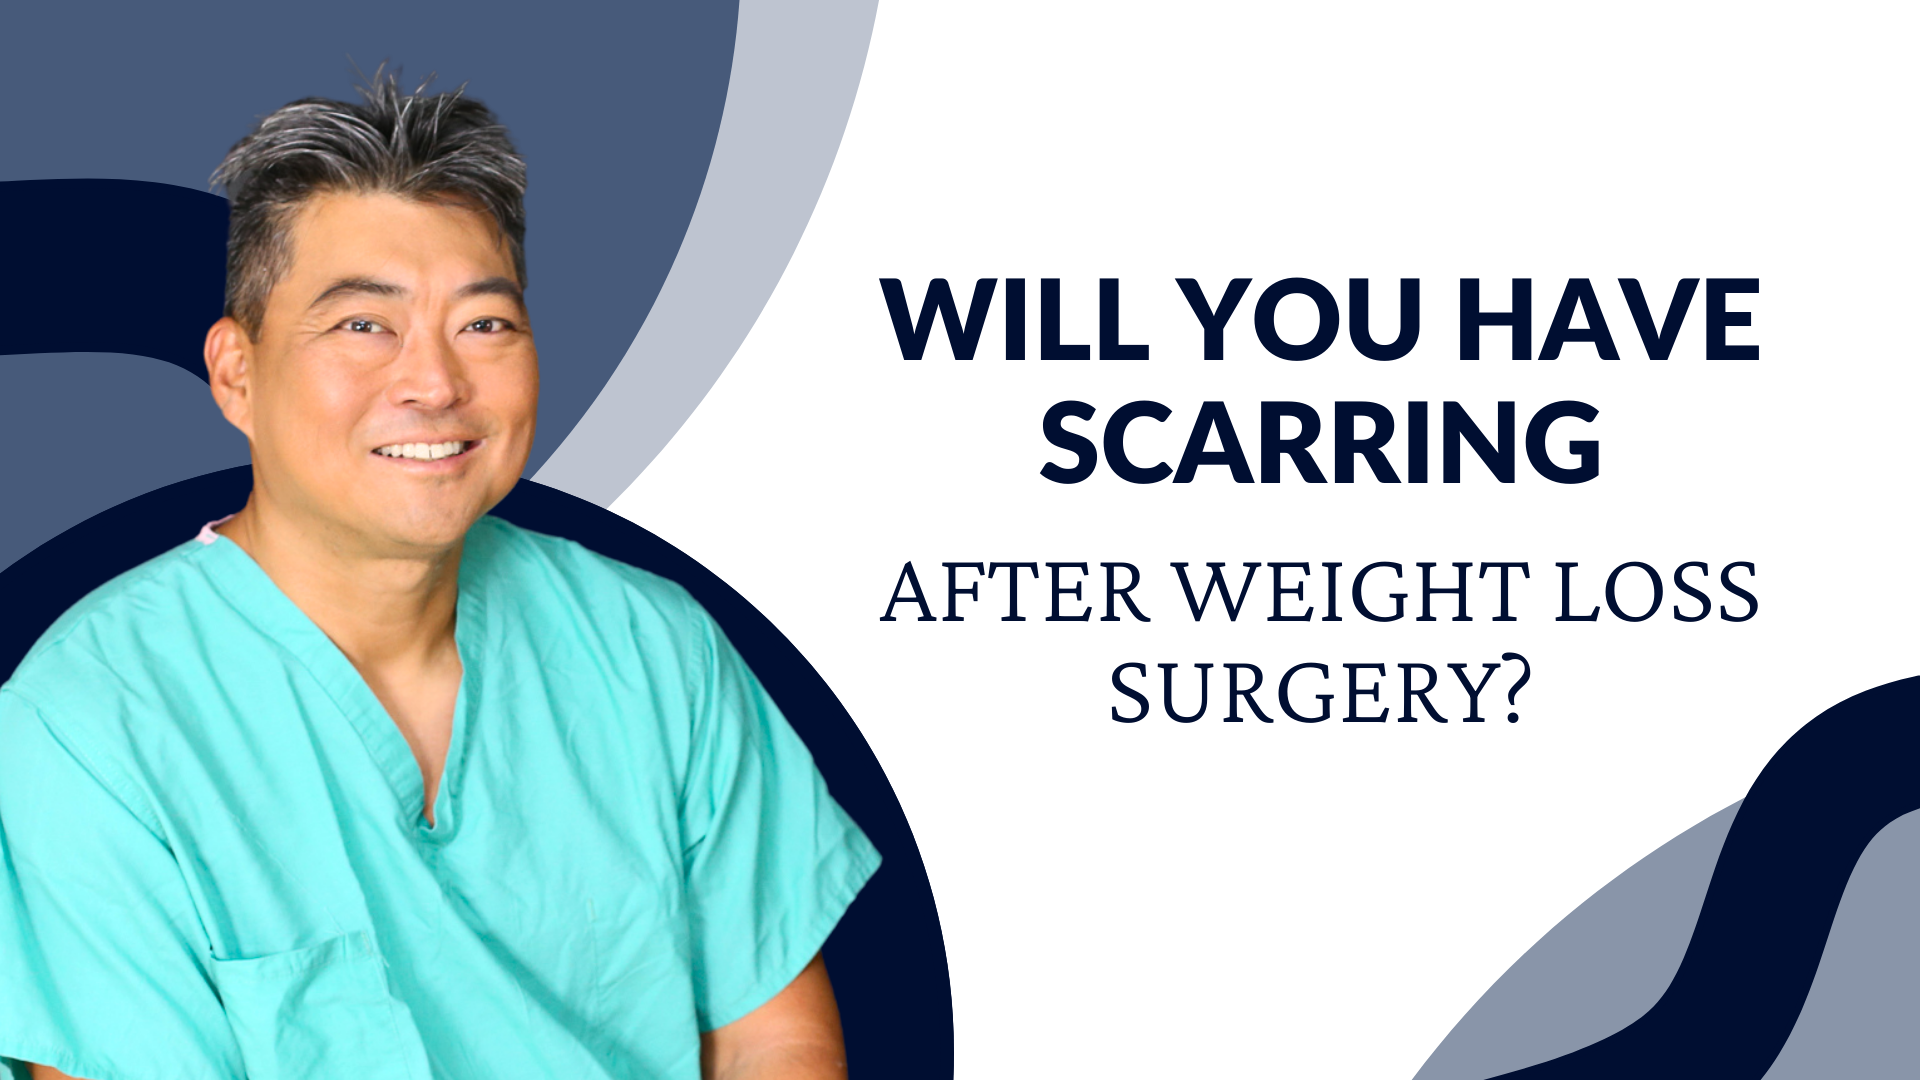 Will You Have Scarring After Weight Loss Surgery